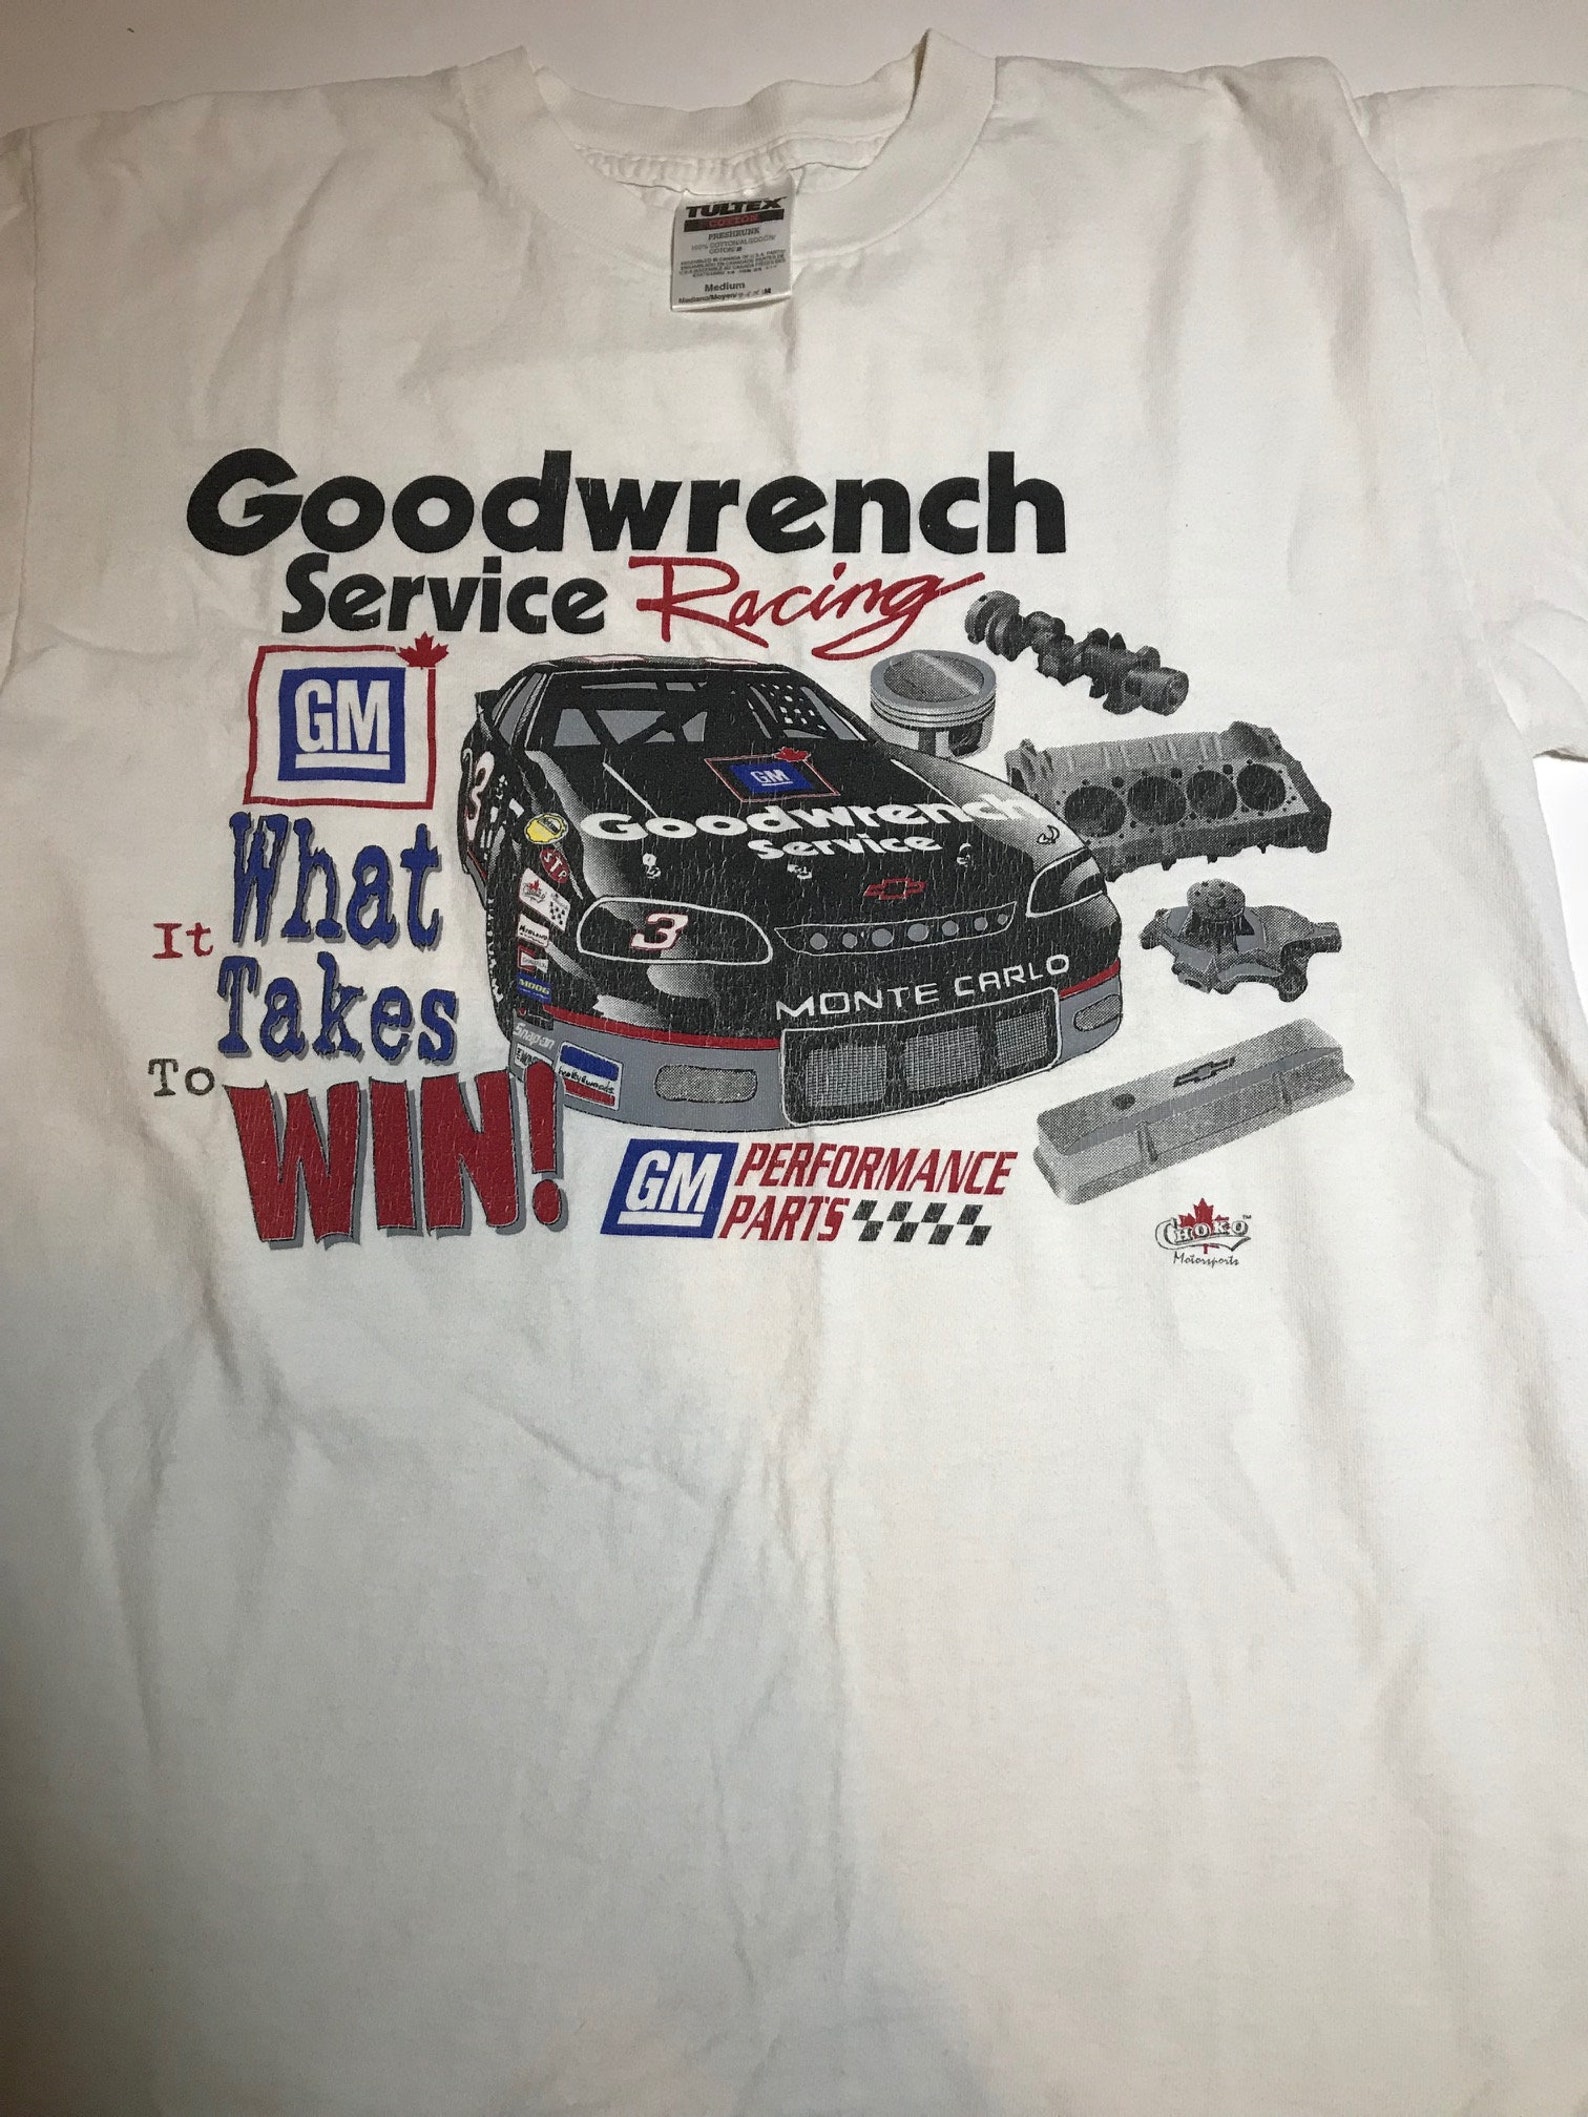 Vintage GM Goodwrench Racing T-Shirt 90s | Etsy